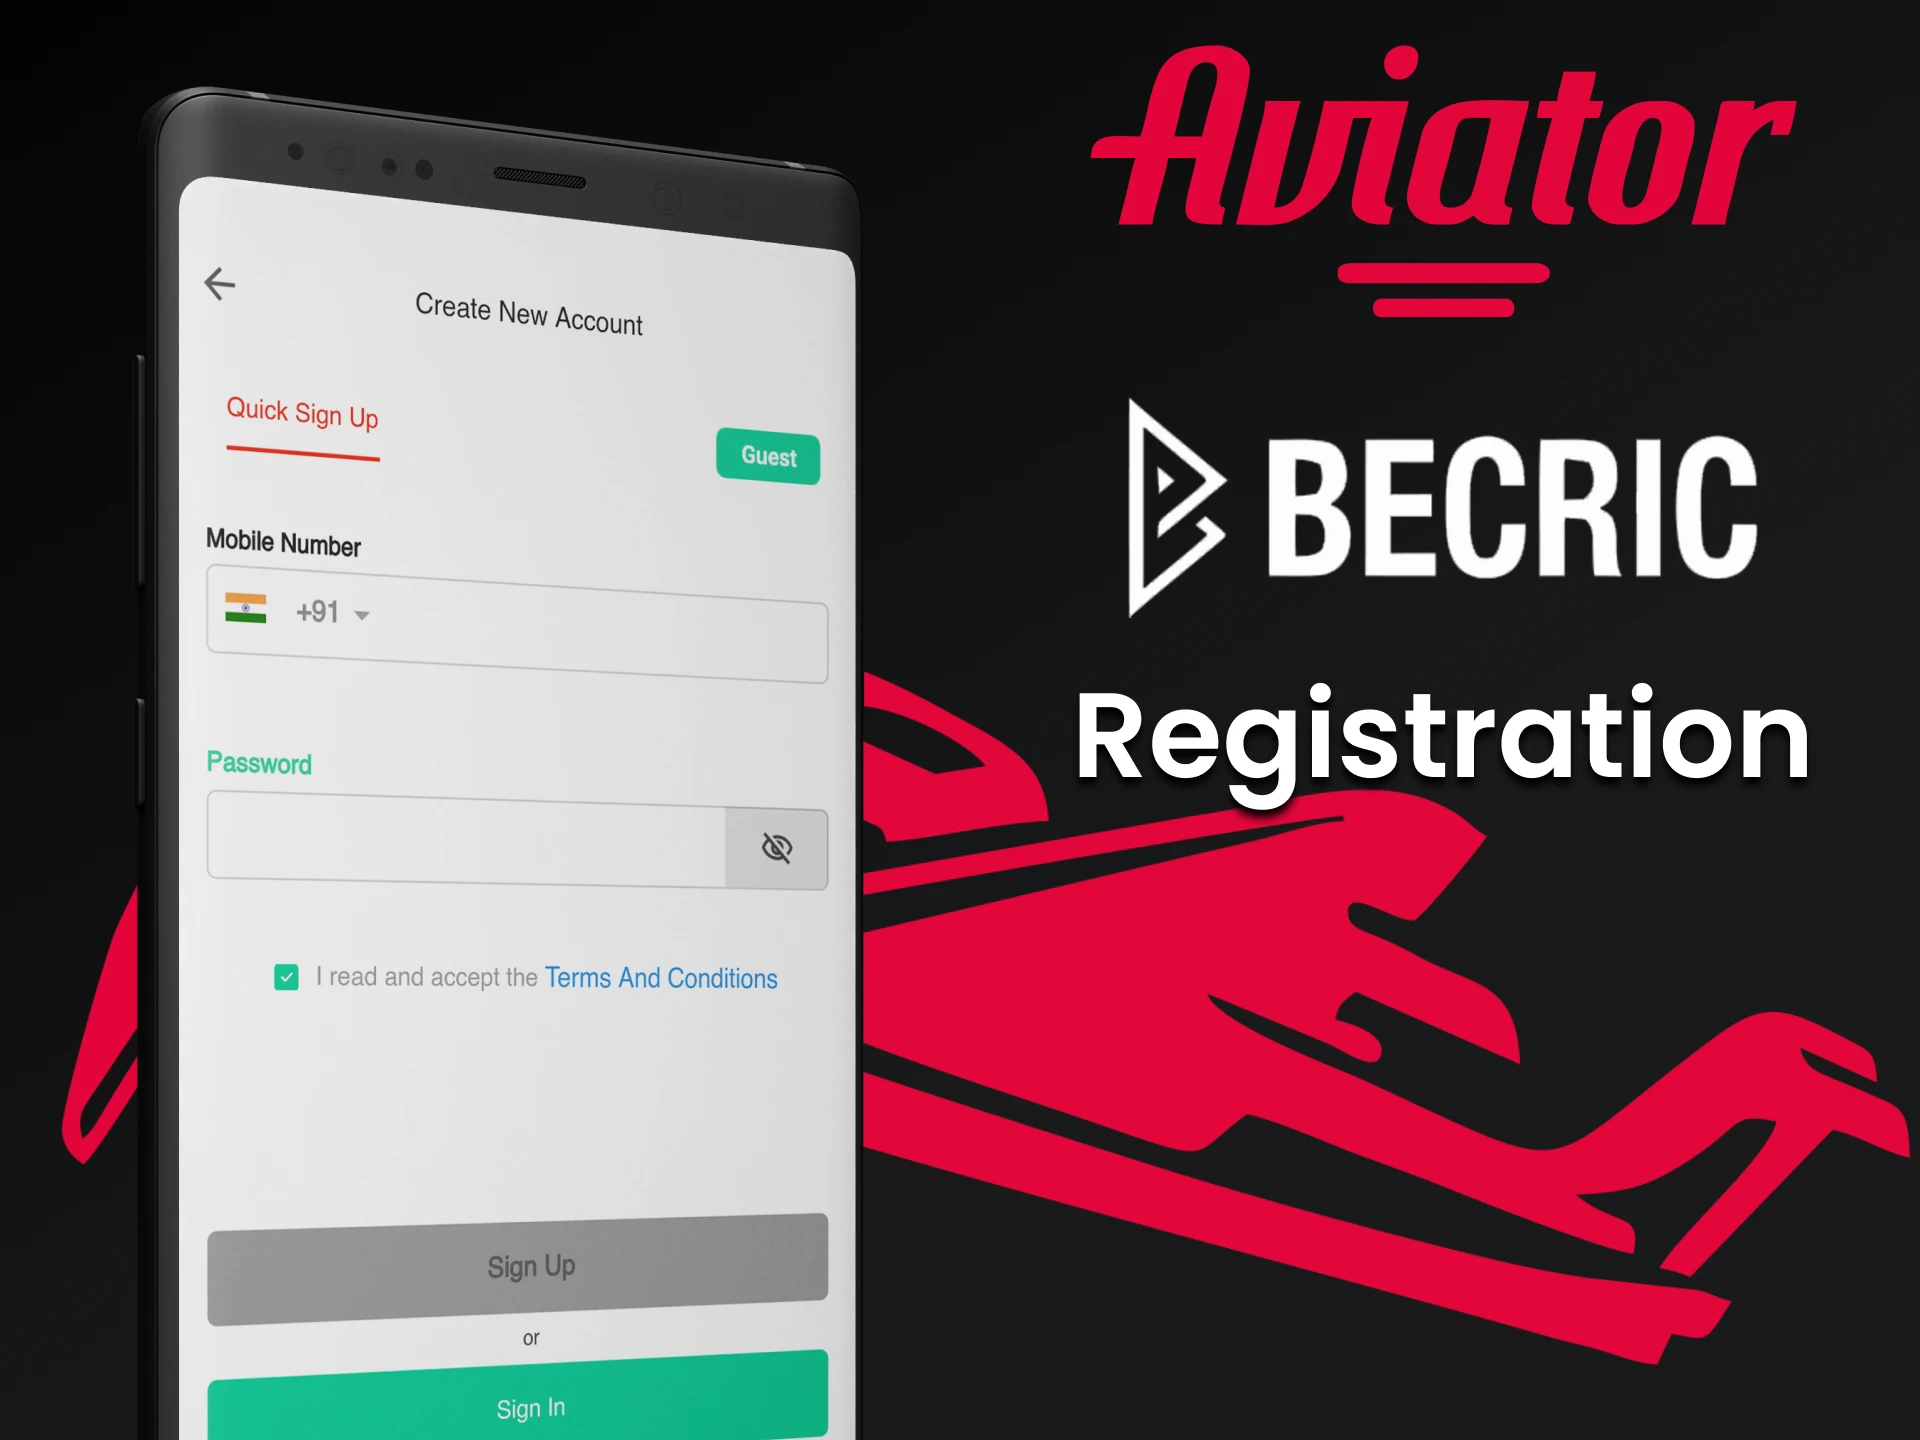 To start playing Aviator you need to create an account on Becric.